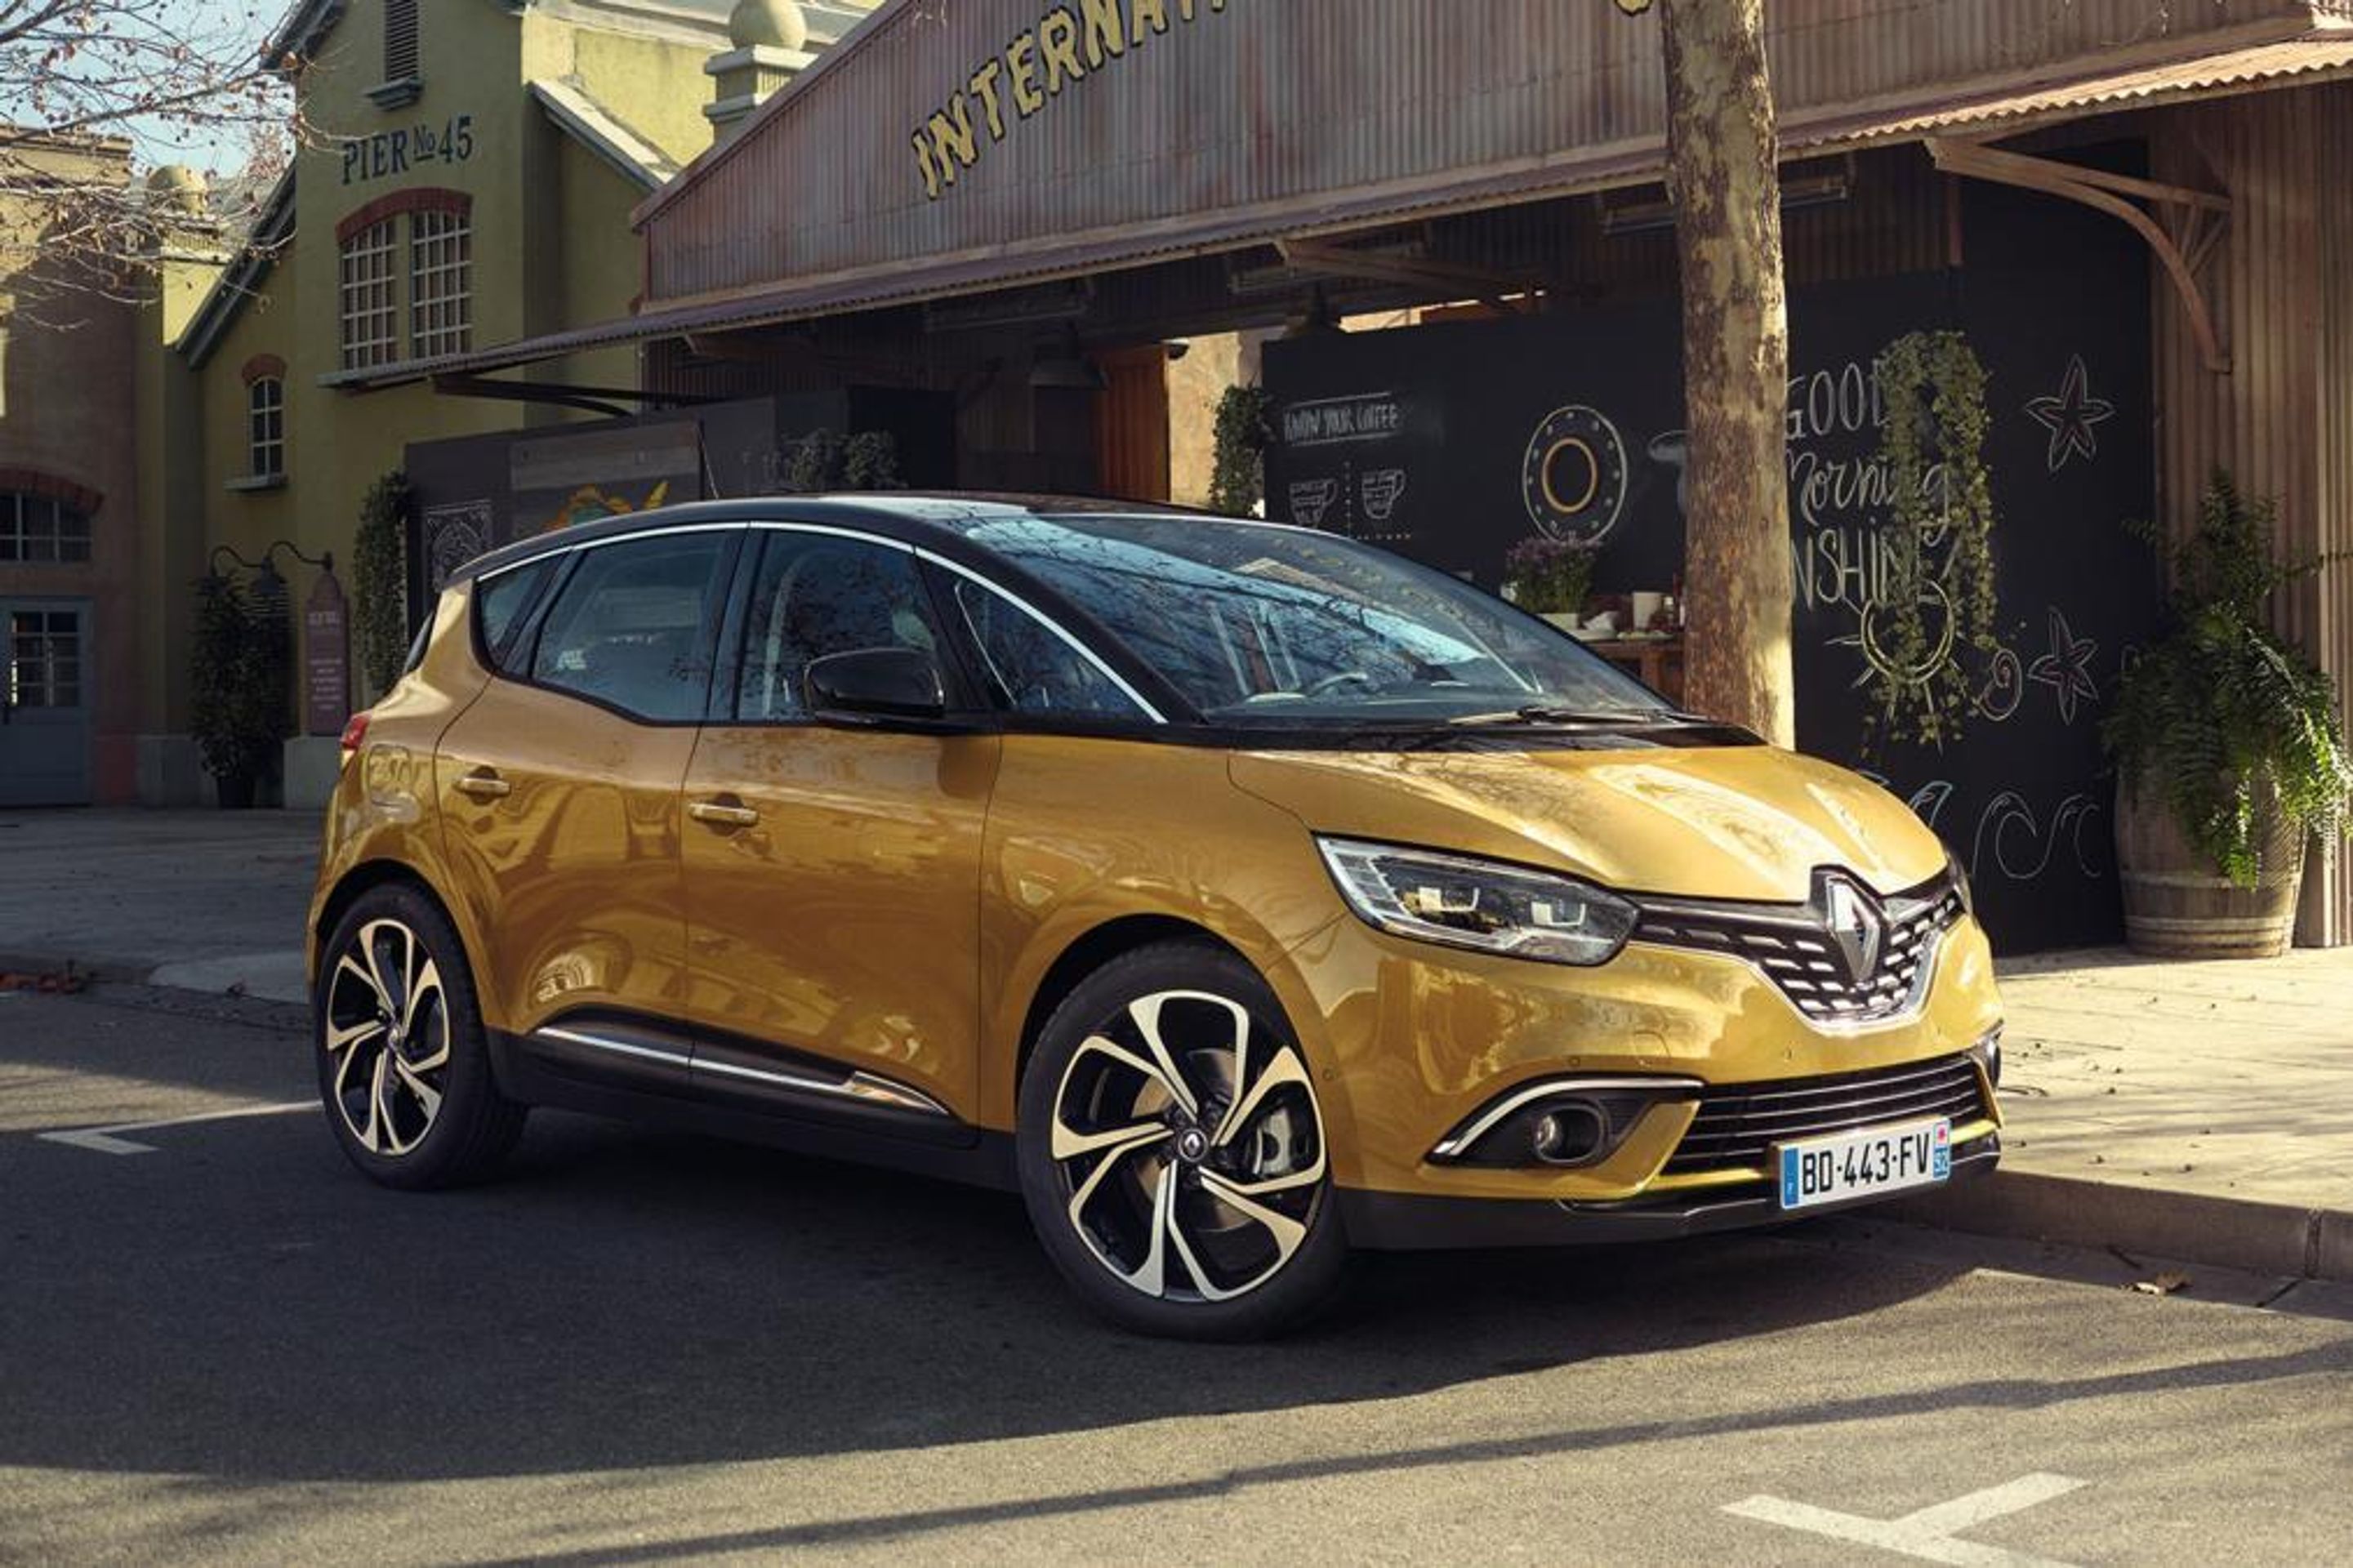 Renault Scénic a Grand Scénic - 15 - GALERIE: Renault Scénic a Grand Scénic (14/14)